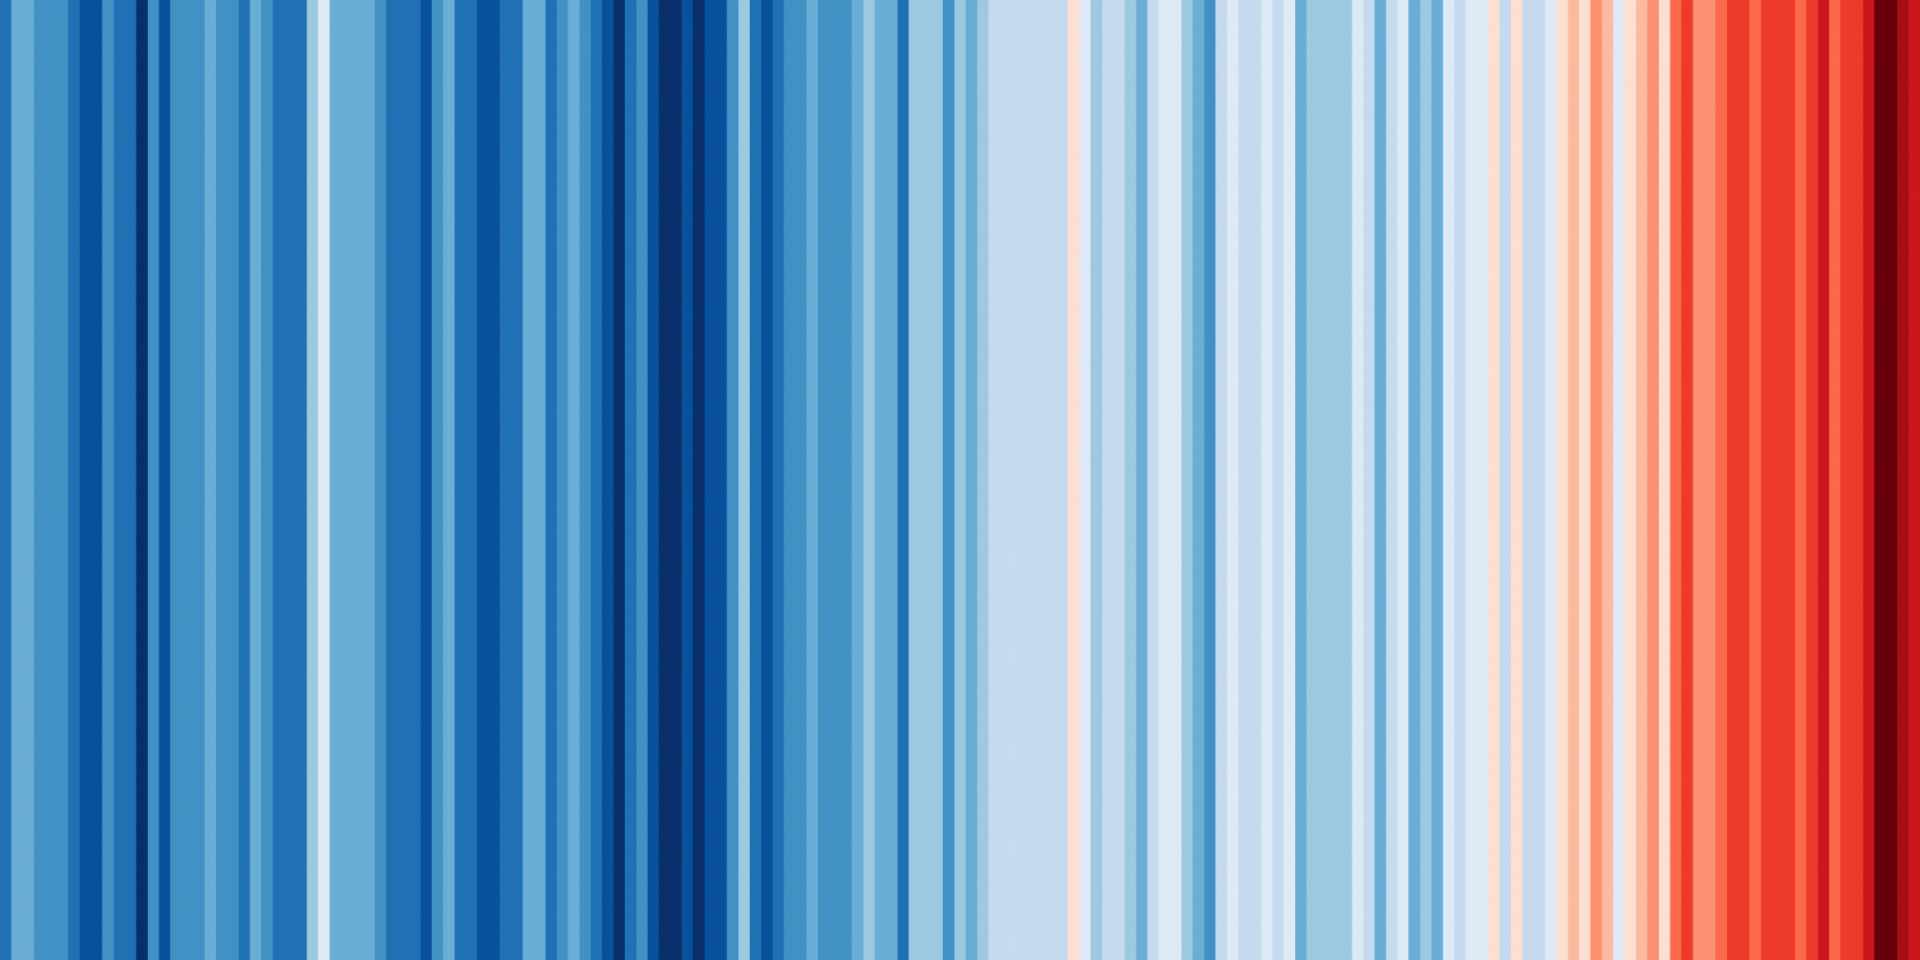 Colored stripes representing the warming temperatures